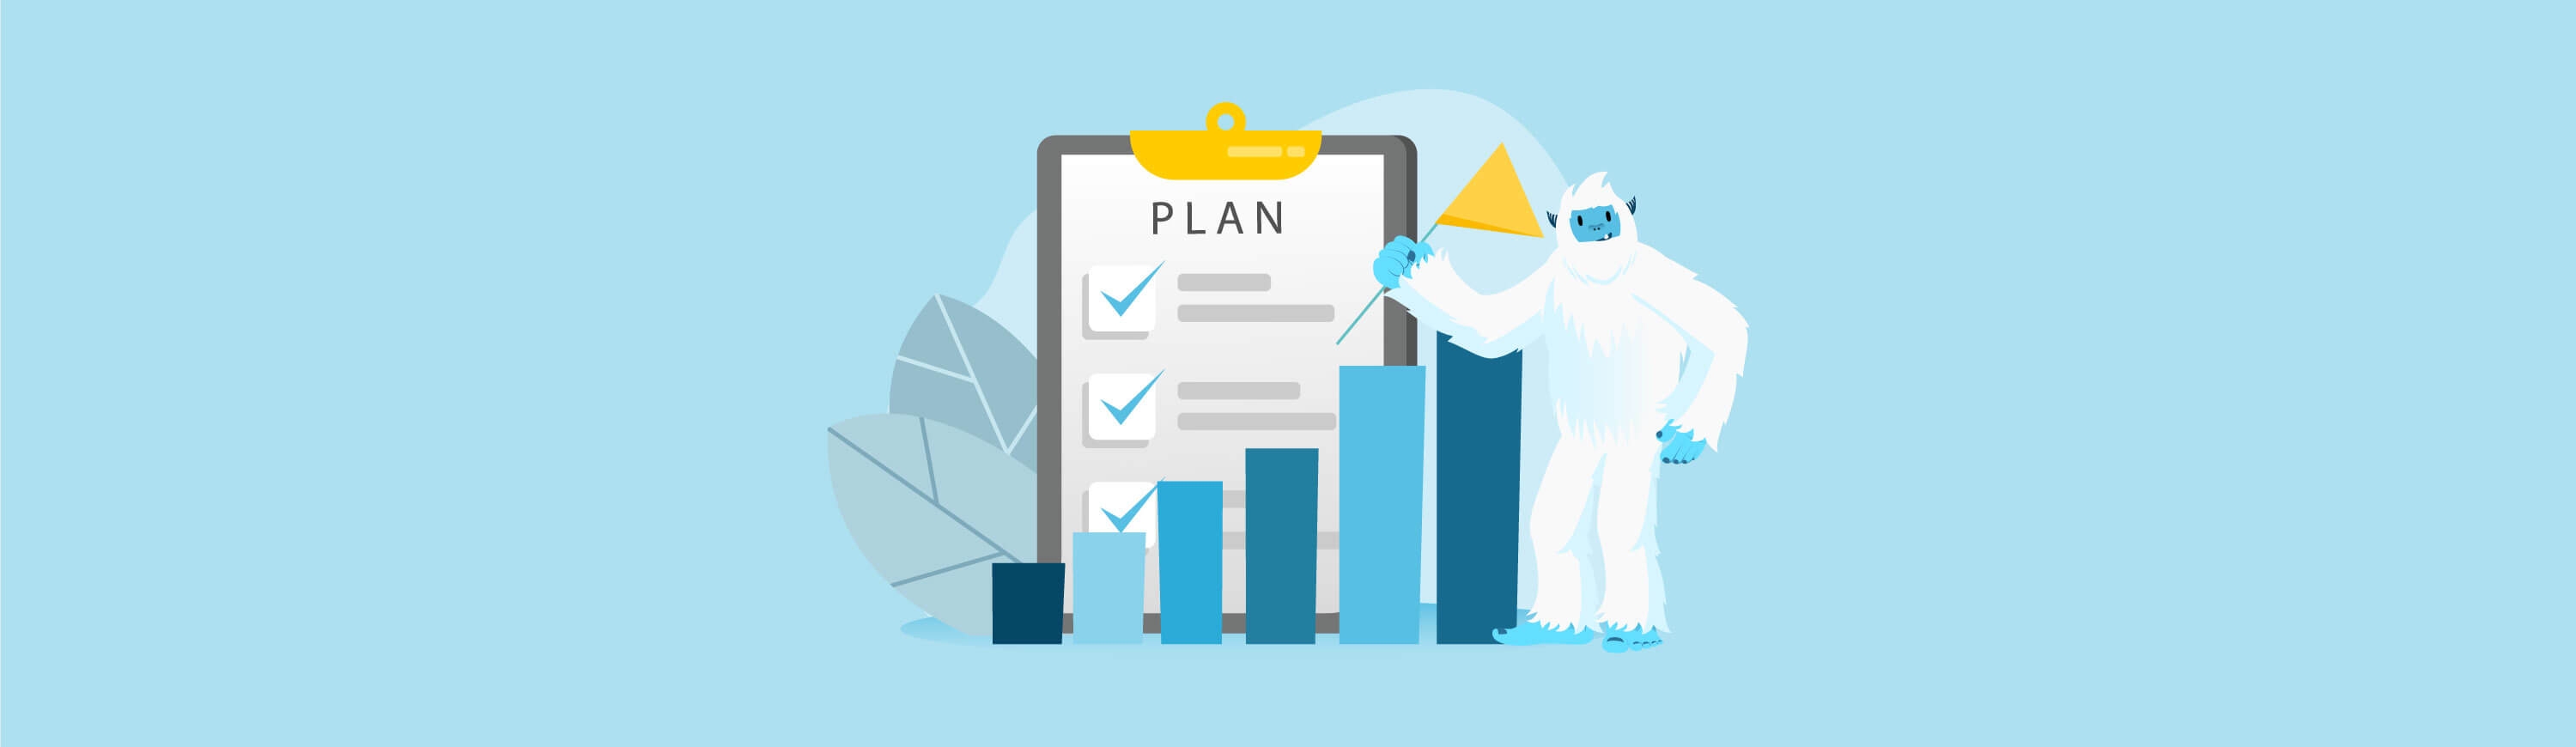 Illustration of Carl the Yeti standing next to bar graphs, a checklist, and holding a flag.